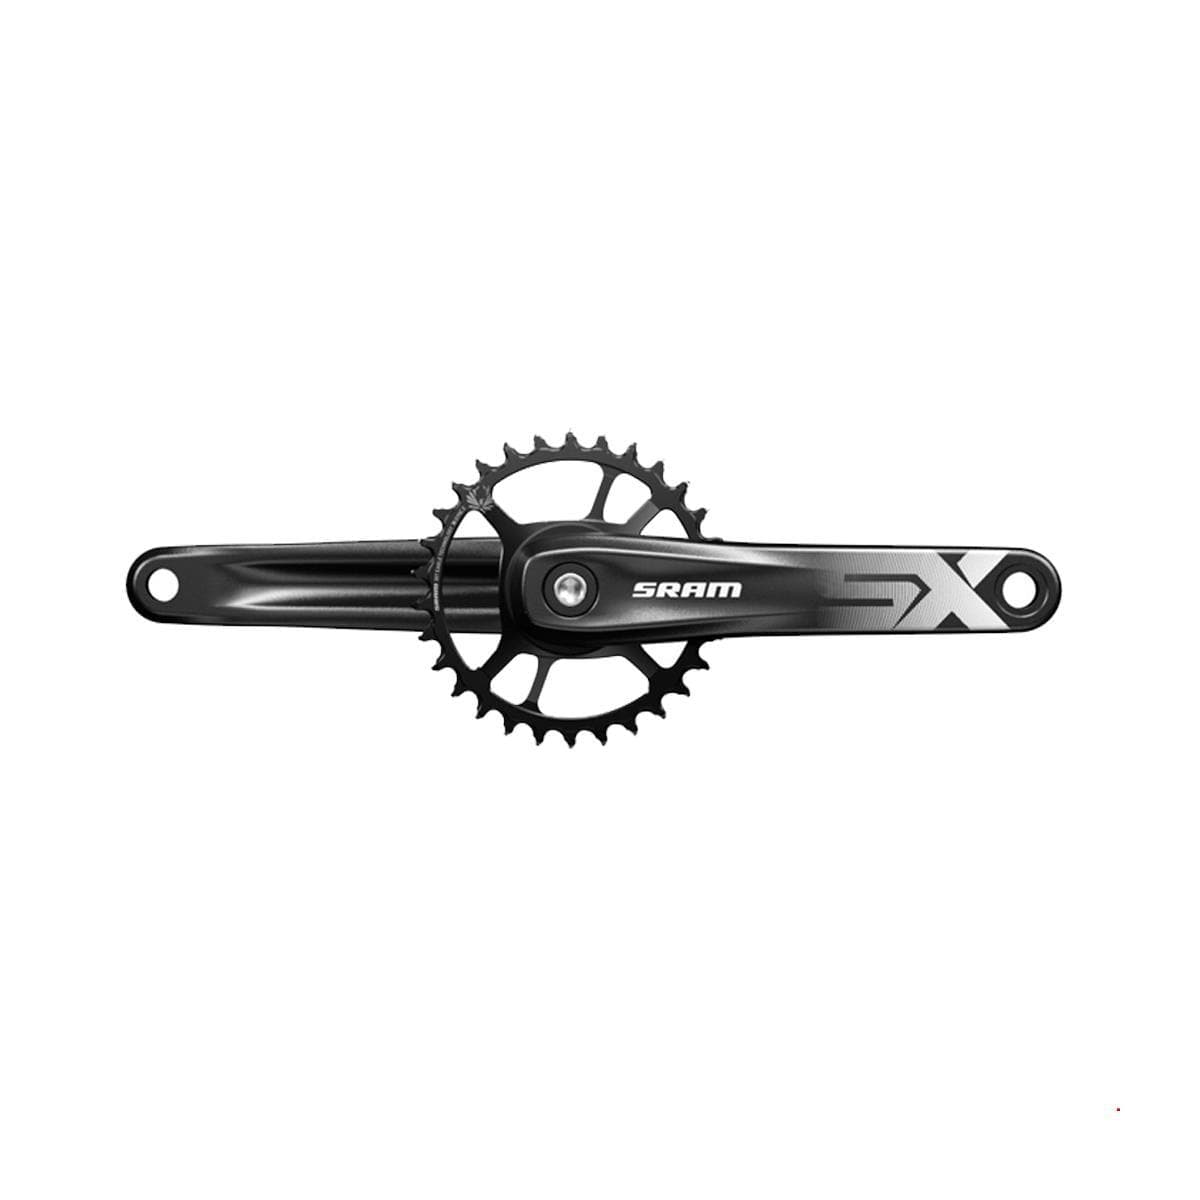 Sram Crankset Sx Eagle Boost 148 Powerspline 12S With Direct Mount 32T X-Sync 2 Steel Chainring A1: Black 165Mm